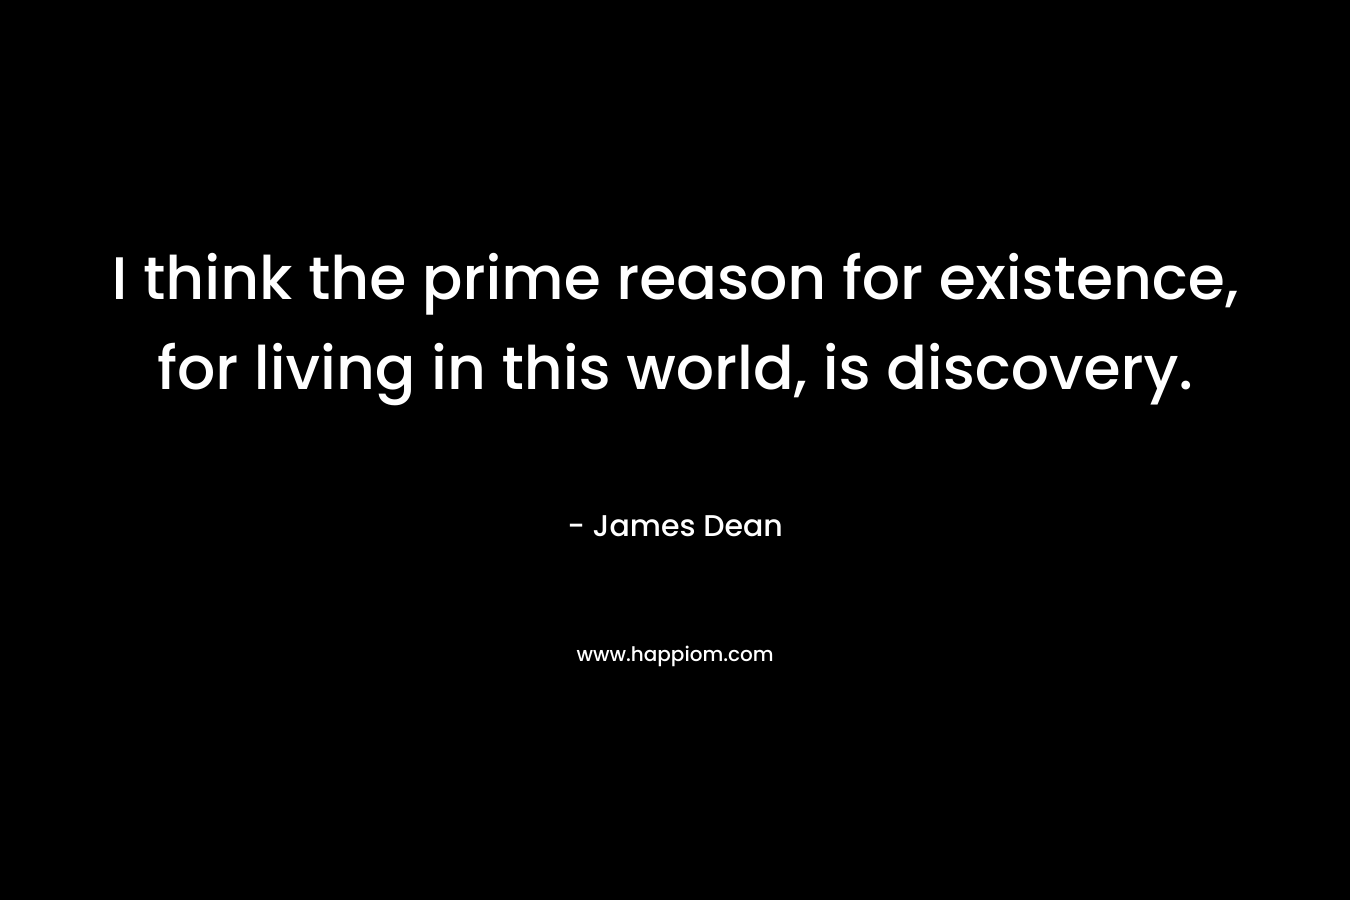 I think the prime reason for existence, for living in this world, is discovery. – James Dean